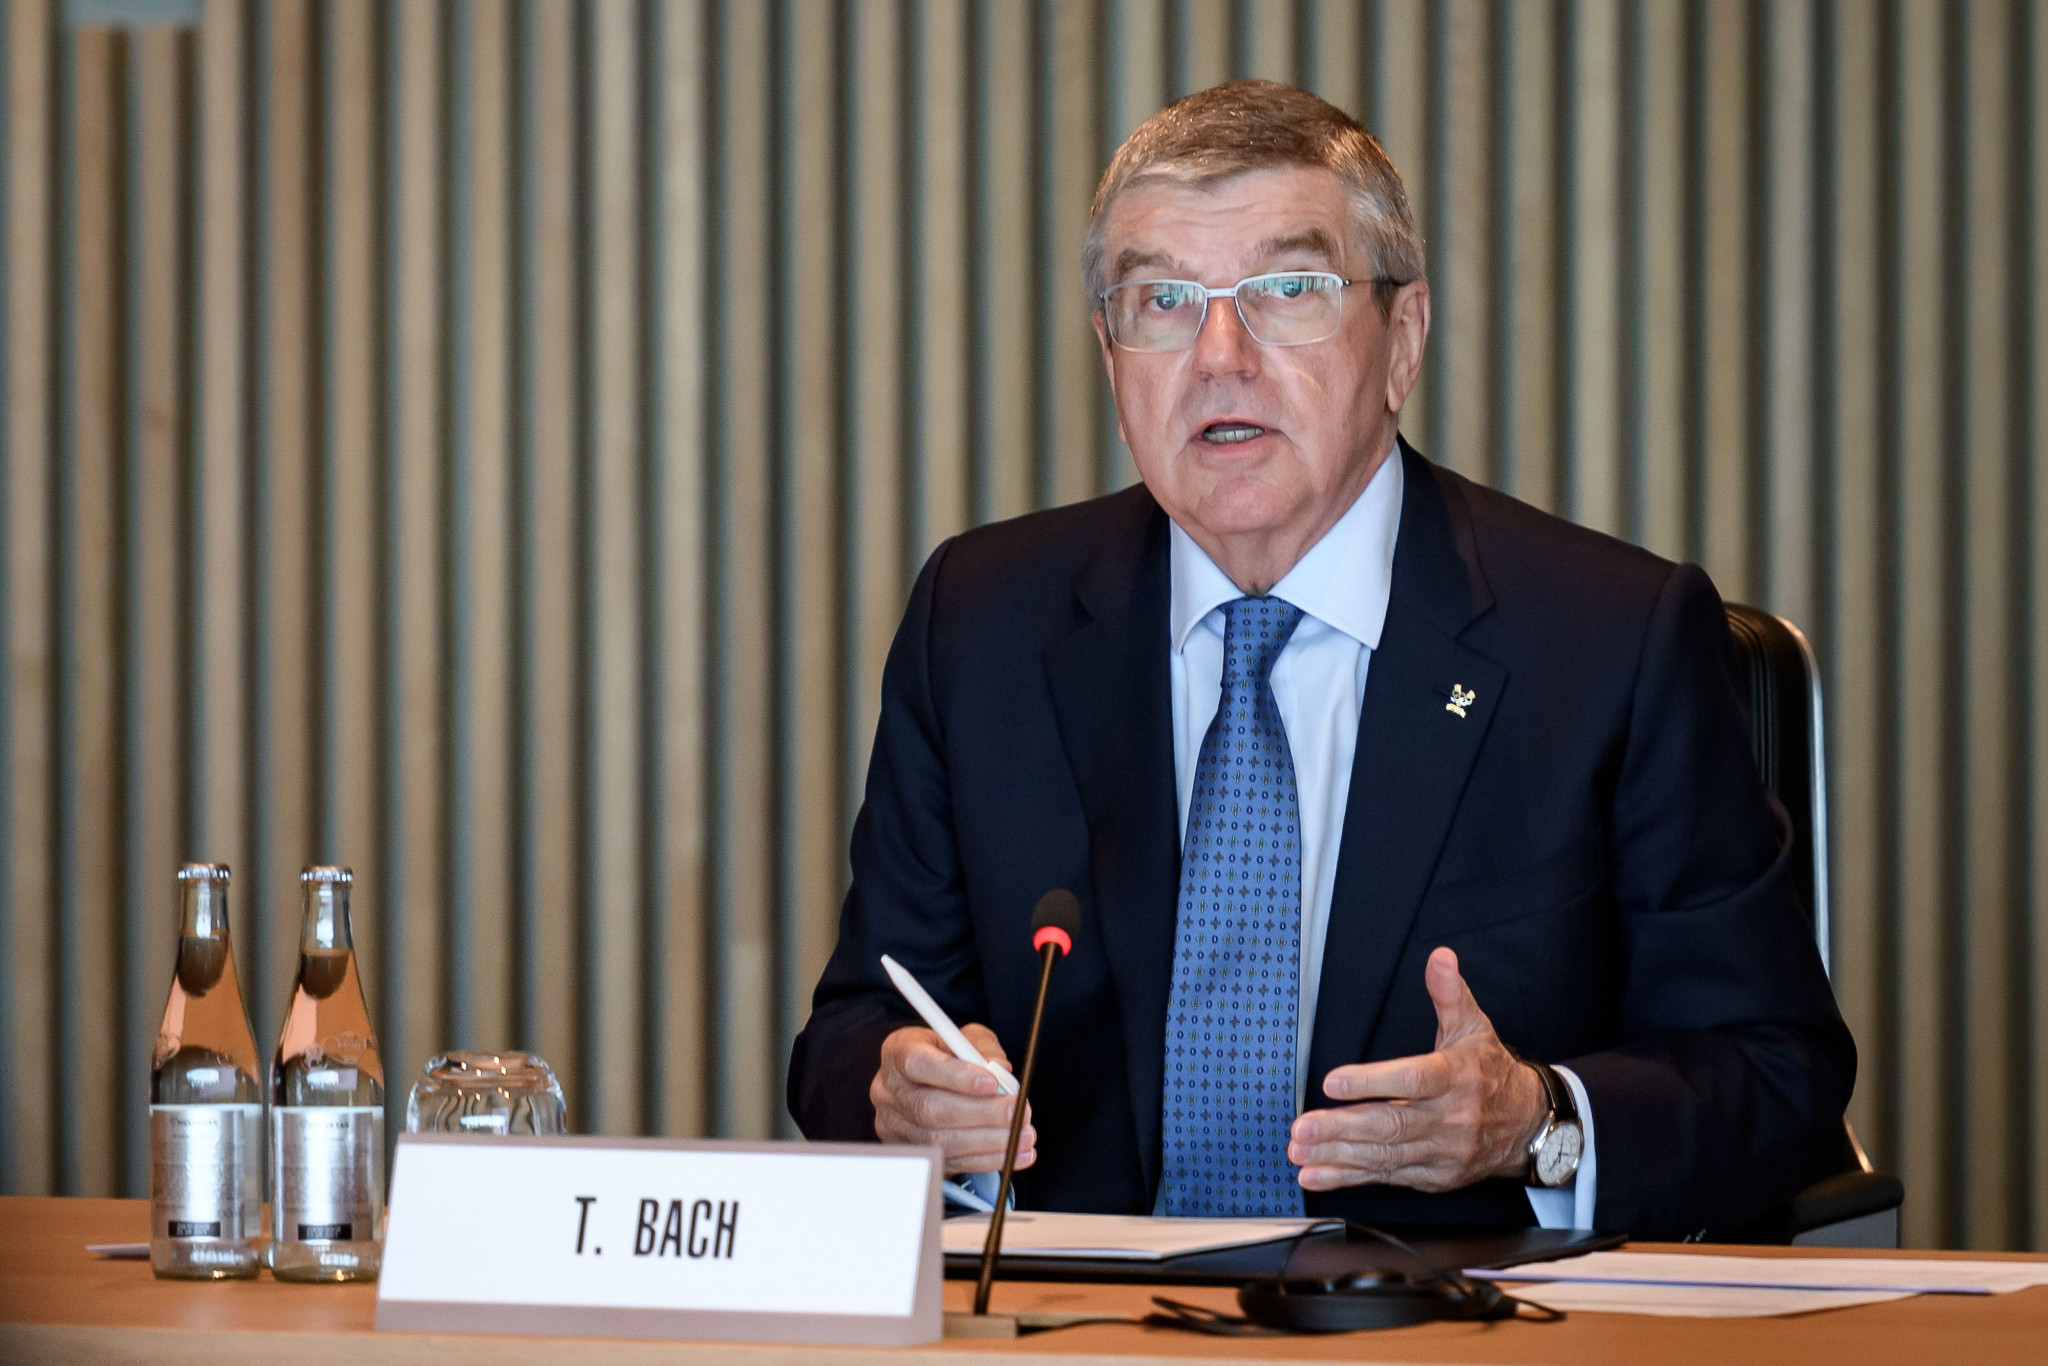 Thomas Bach wrote an open letter to the Olympic Movement to start a debate on the challenges and opportunities of the pandemic ©Getty Images